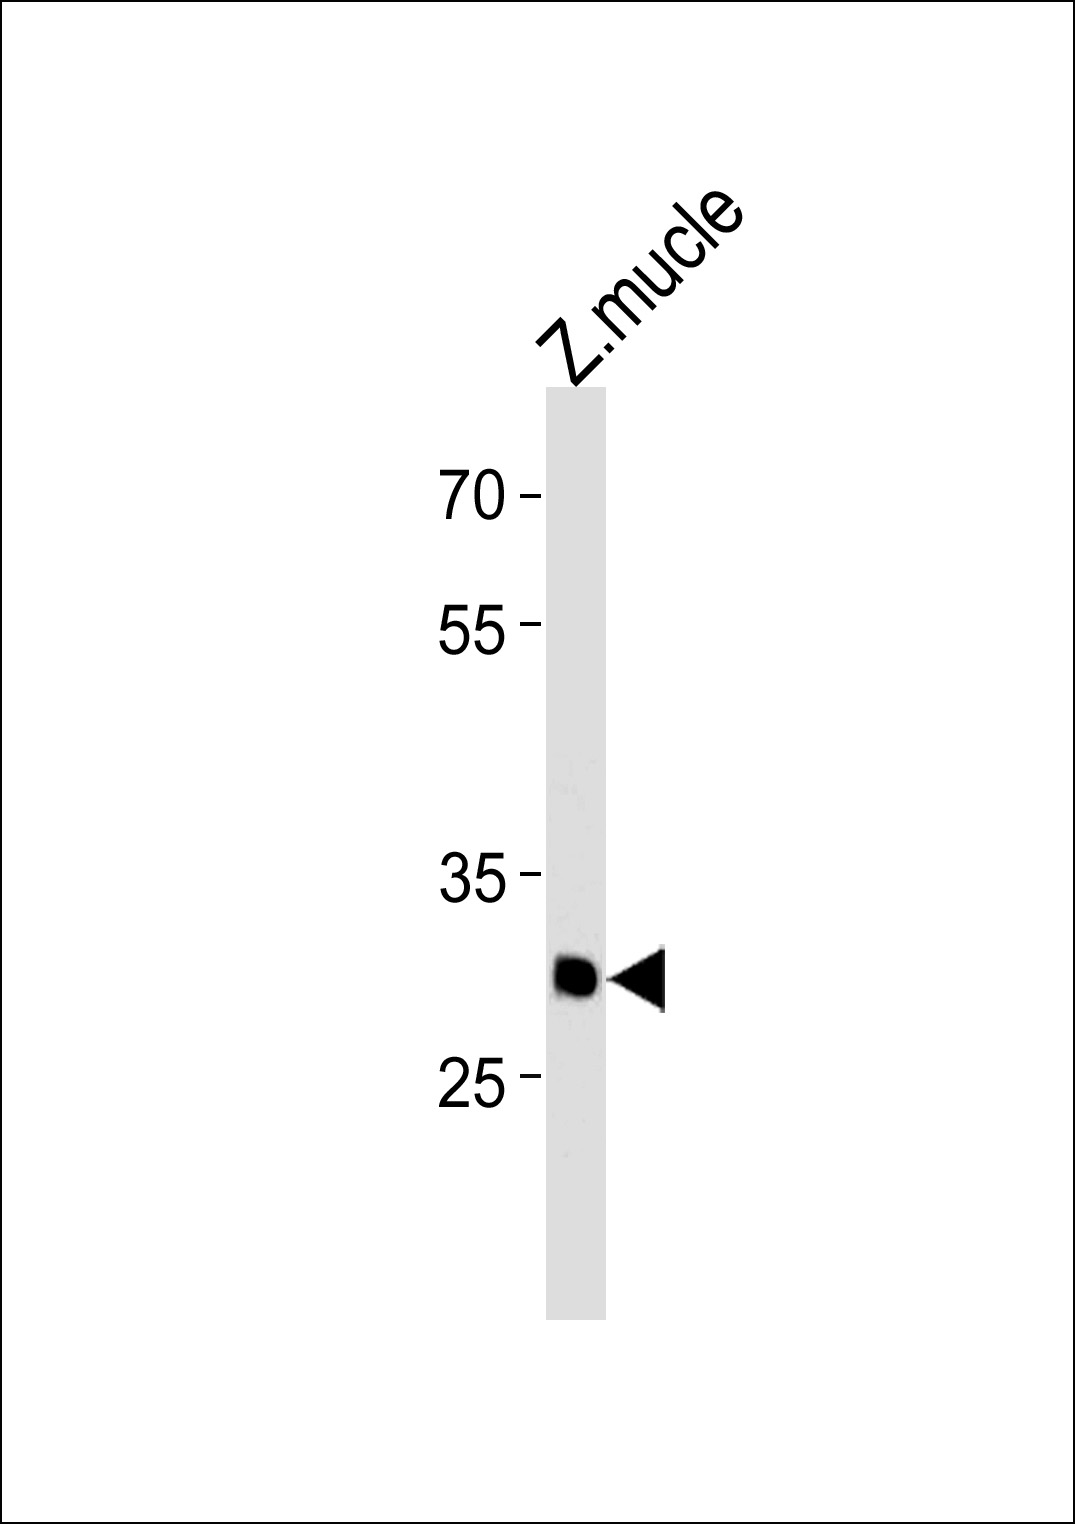 DANREhmx3 Antibody (Center) (Cat. #Azb10011a) western blot analysis in zebra fish muscle tissue lysates (35ug/lane).This demonstrates the DANREhmx3 antibody detected the DANREhmx3 protein (arrow).